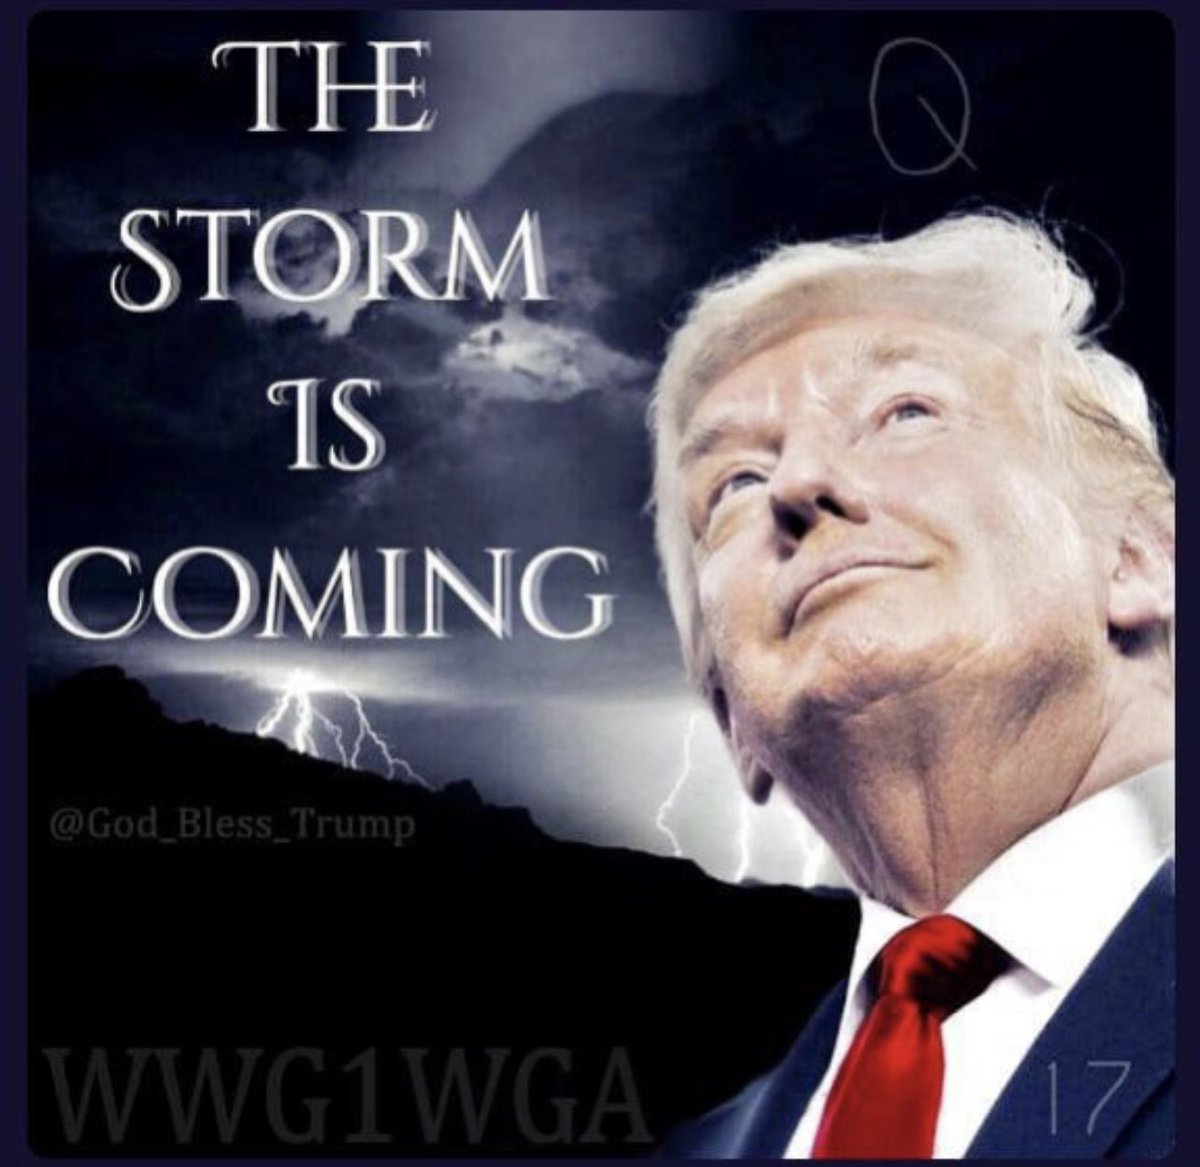 Dear Patriots,

THE STORM IS COMING! 🌊🌪️⚡️⛈️

All you have to do is trust GOD!

#TheStormIsComing

#TheStormIsUponUs